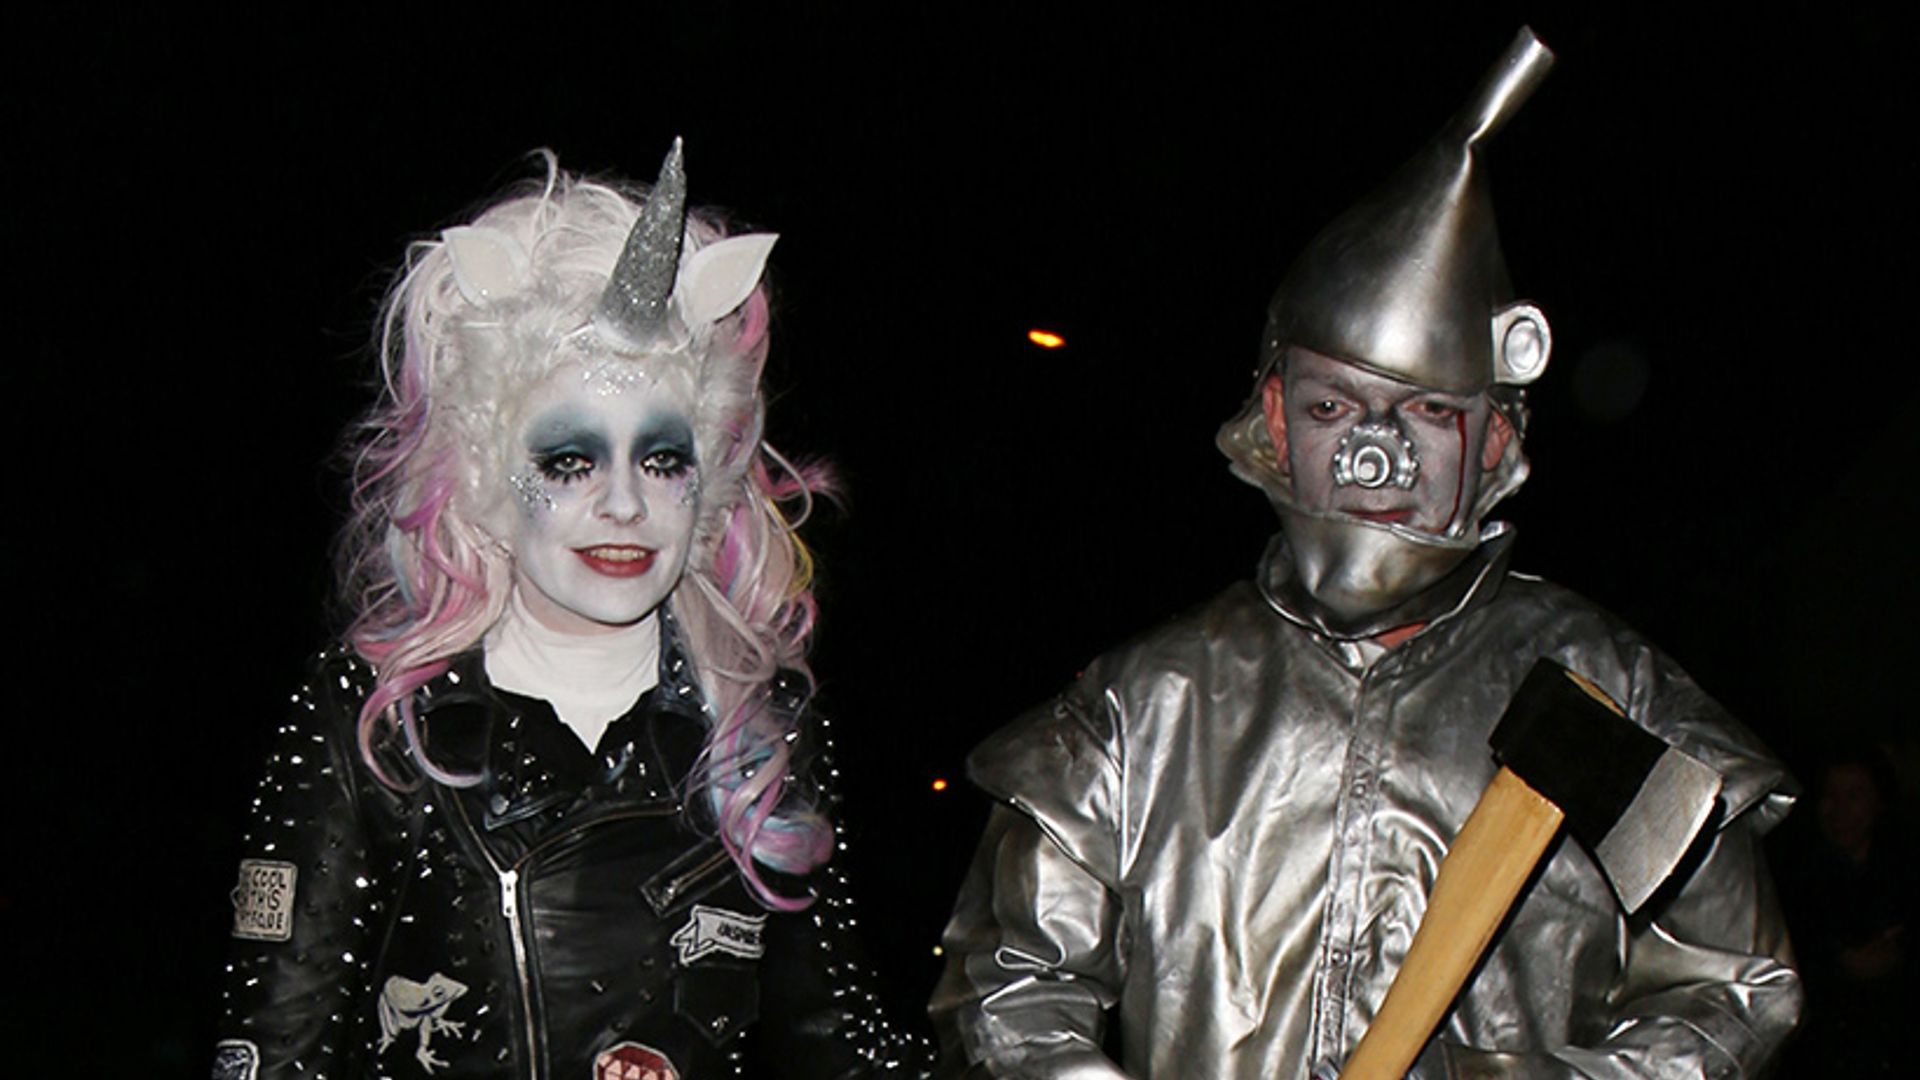 Jonathan Ross hosts annual Halloween party: click to see best celebrity costumes